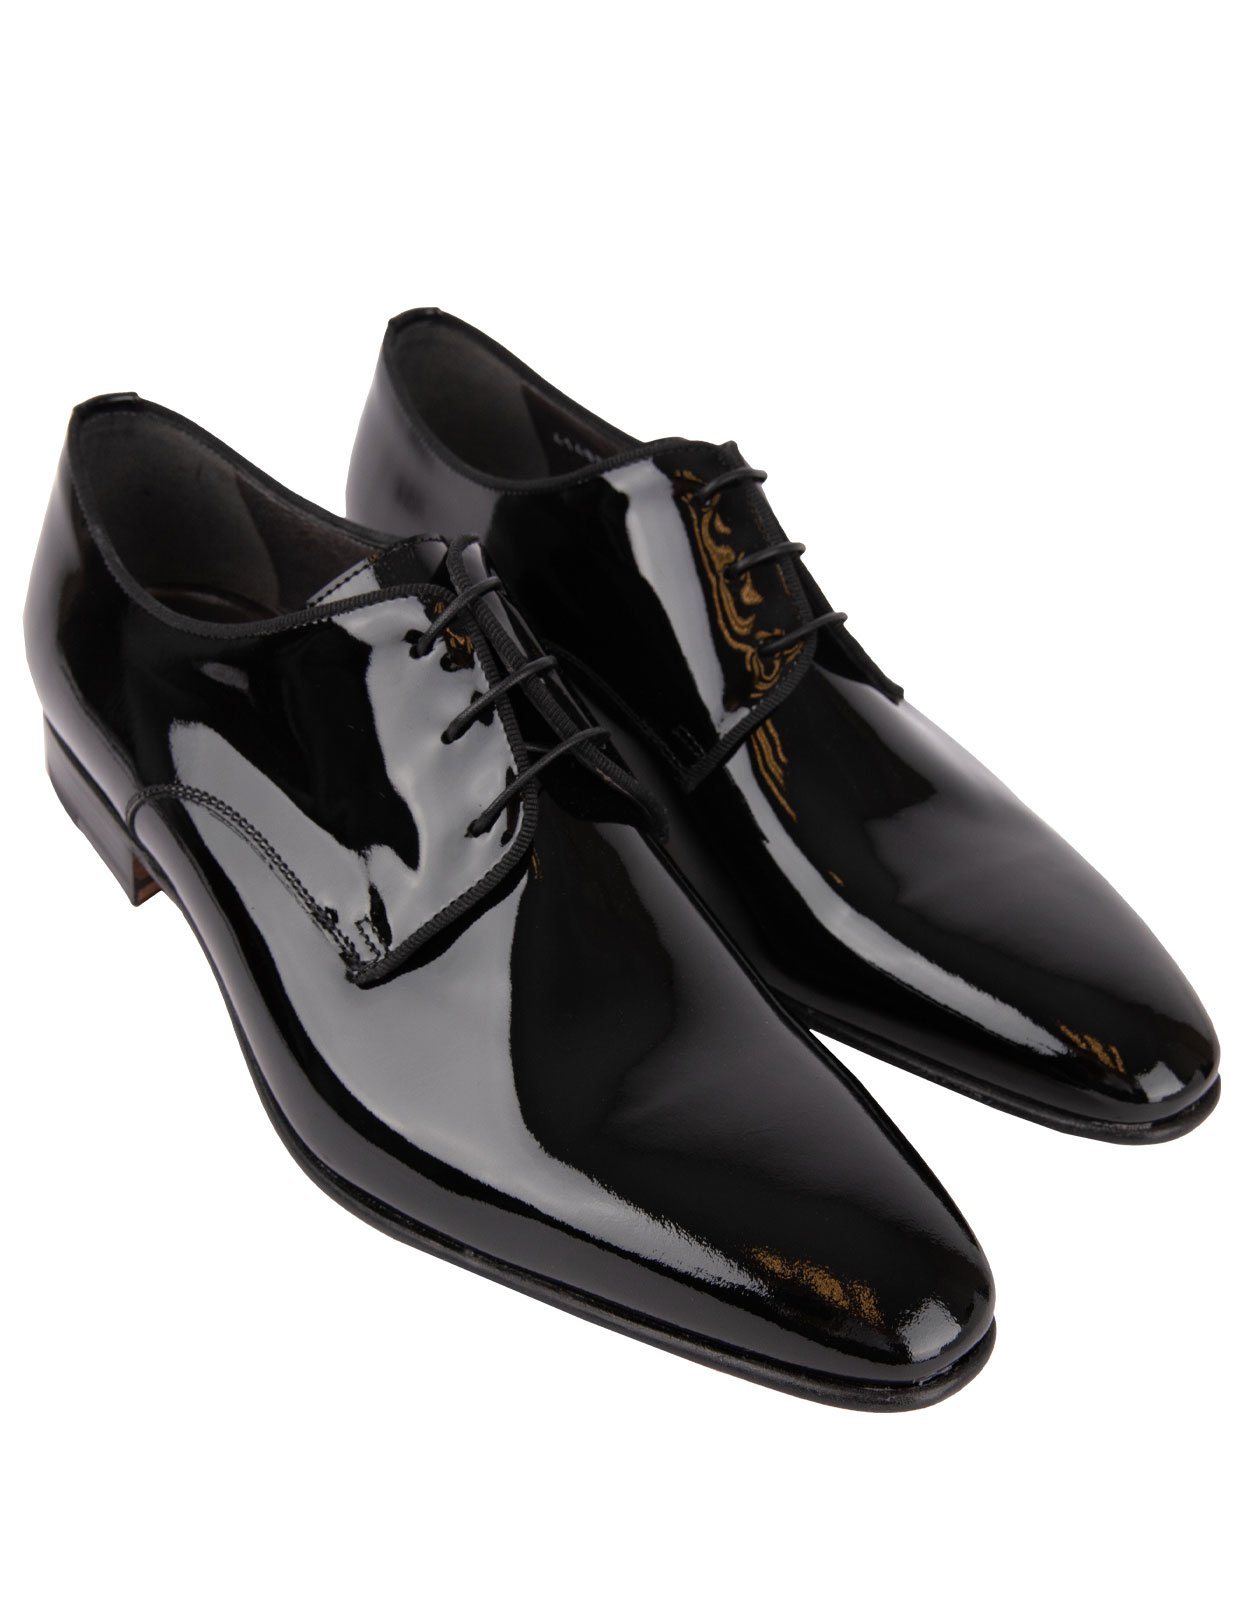 Lille Patent Leather Derby Shoes Black Stl 7.5